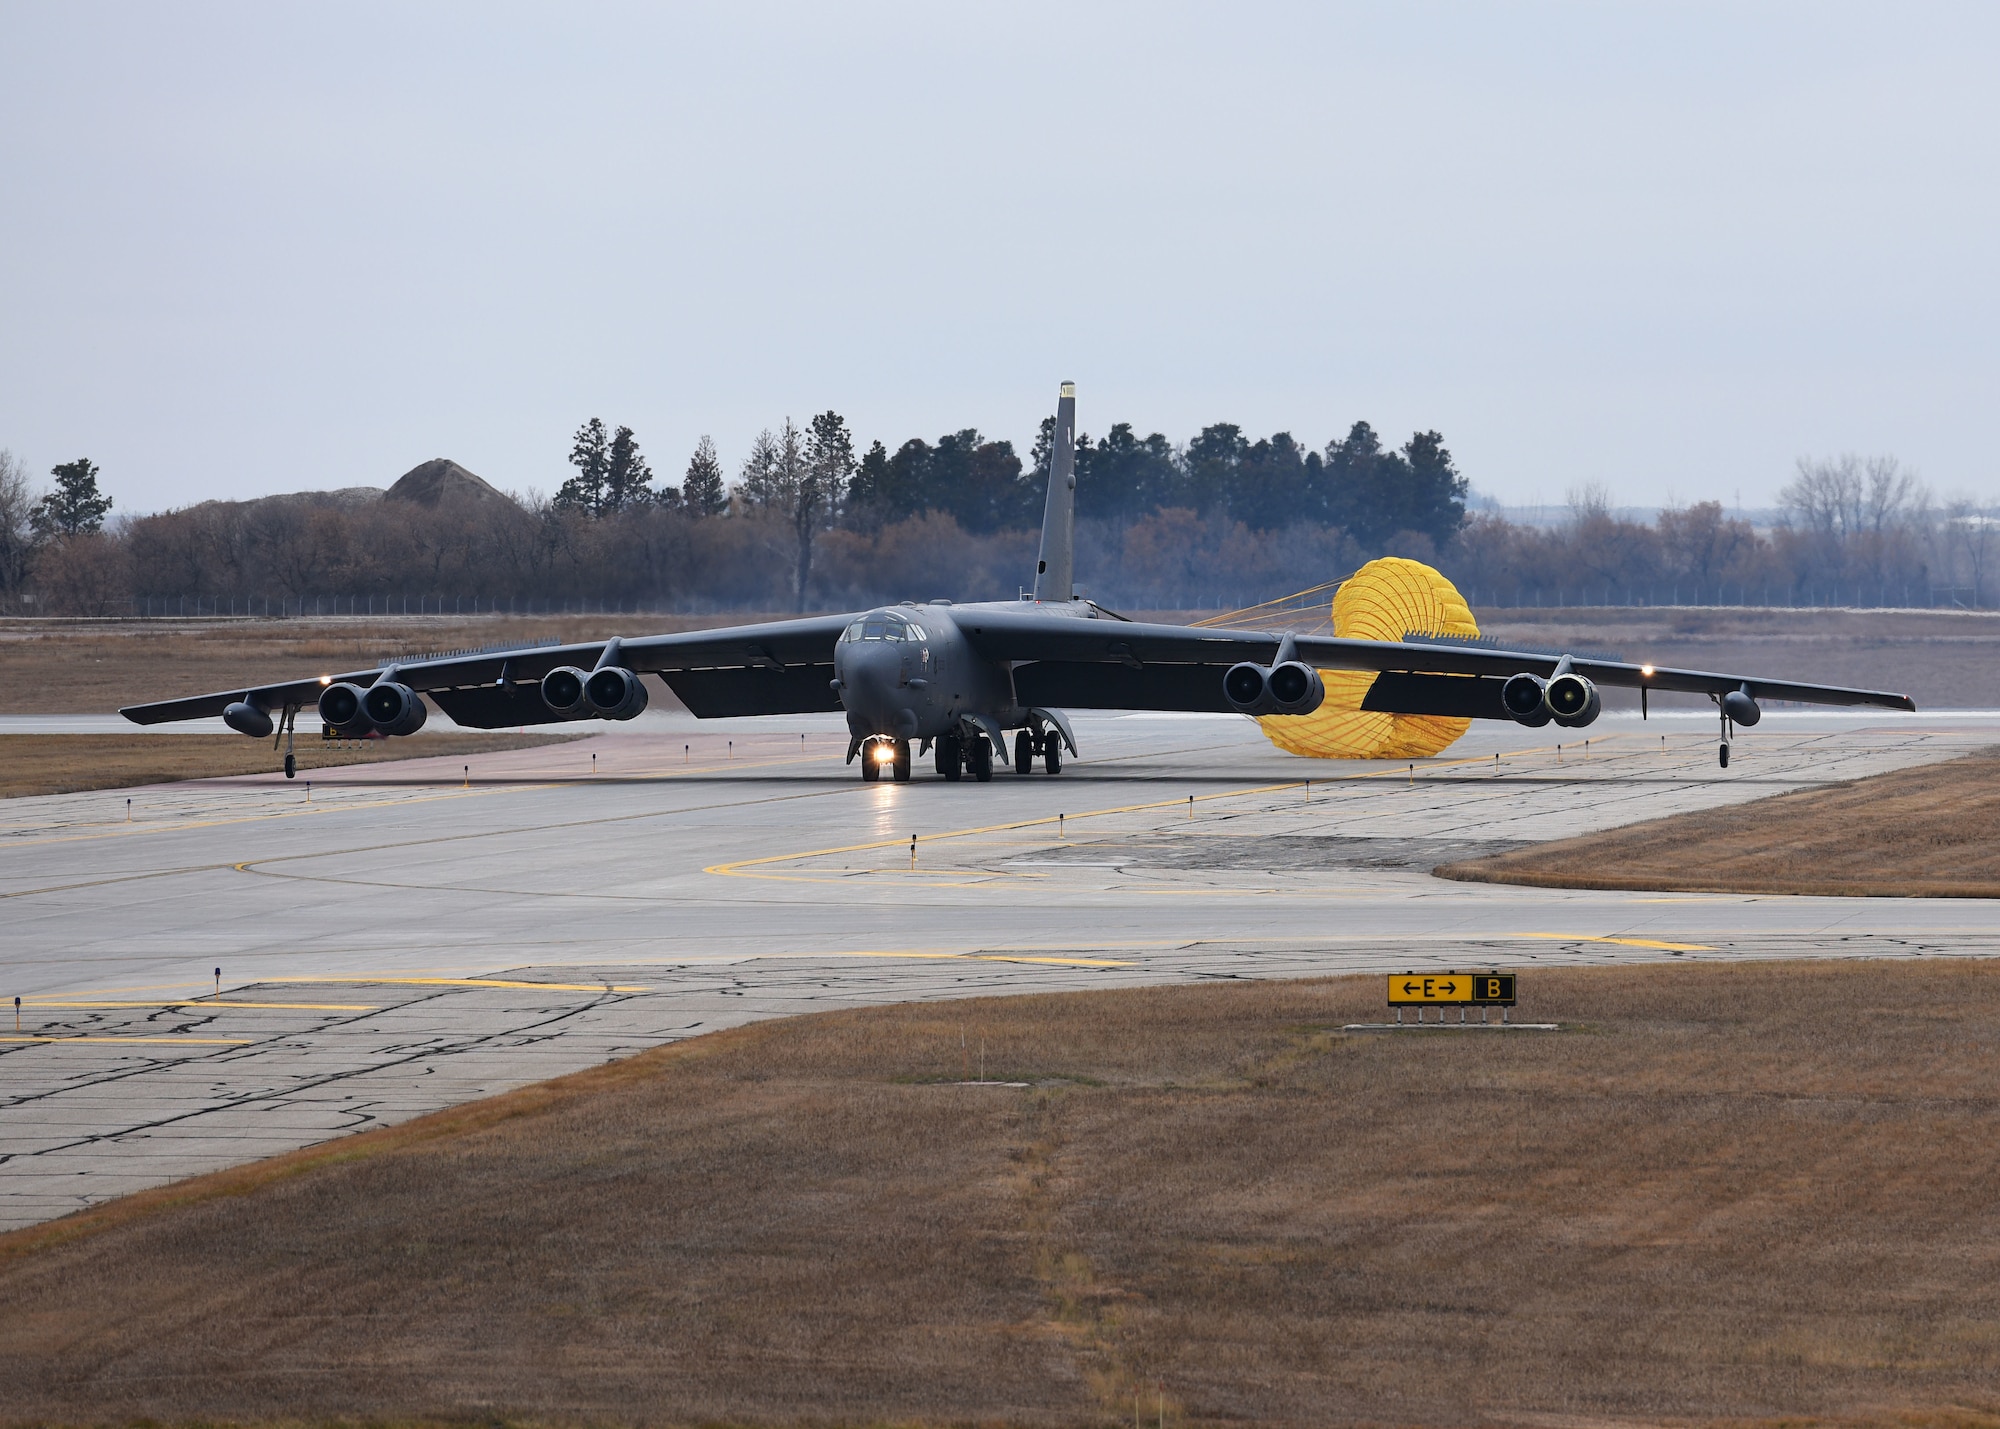 A B-52H Stratofortress lands during Global Thunder 19 at Minot Air Force Base, N.D., Nov. 4, 2018. Global Thunder is a globally integrated exercise that provides training opportunities that assess all U.S. Strategic Command (USSTRATCOM) mission areas and joint and field training operational readiness, with a specific focus on nuclear readiness. USSTRATCOM has global responsibilities assigned through the Unified Command Plan that includes strategic deterrence, nuclear operations, space operations, joint electromagnetic spectrum operations, global strike, missile defense, and analysis and targeting. (U.S. Air Force Photo by Airman 1st Class Dillon J. Audit)